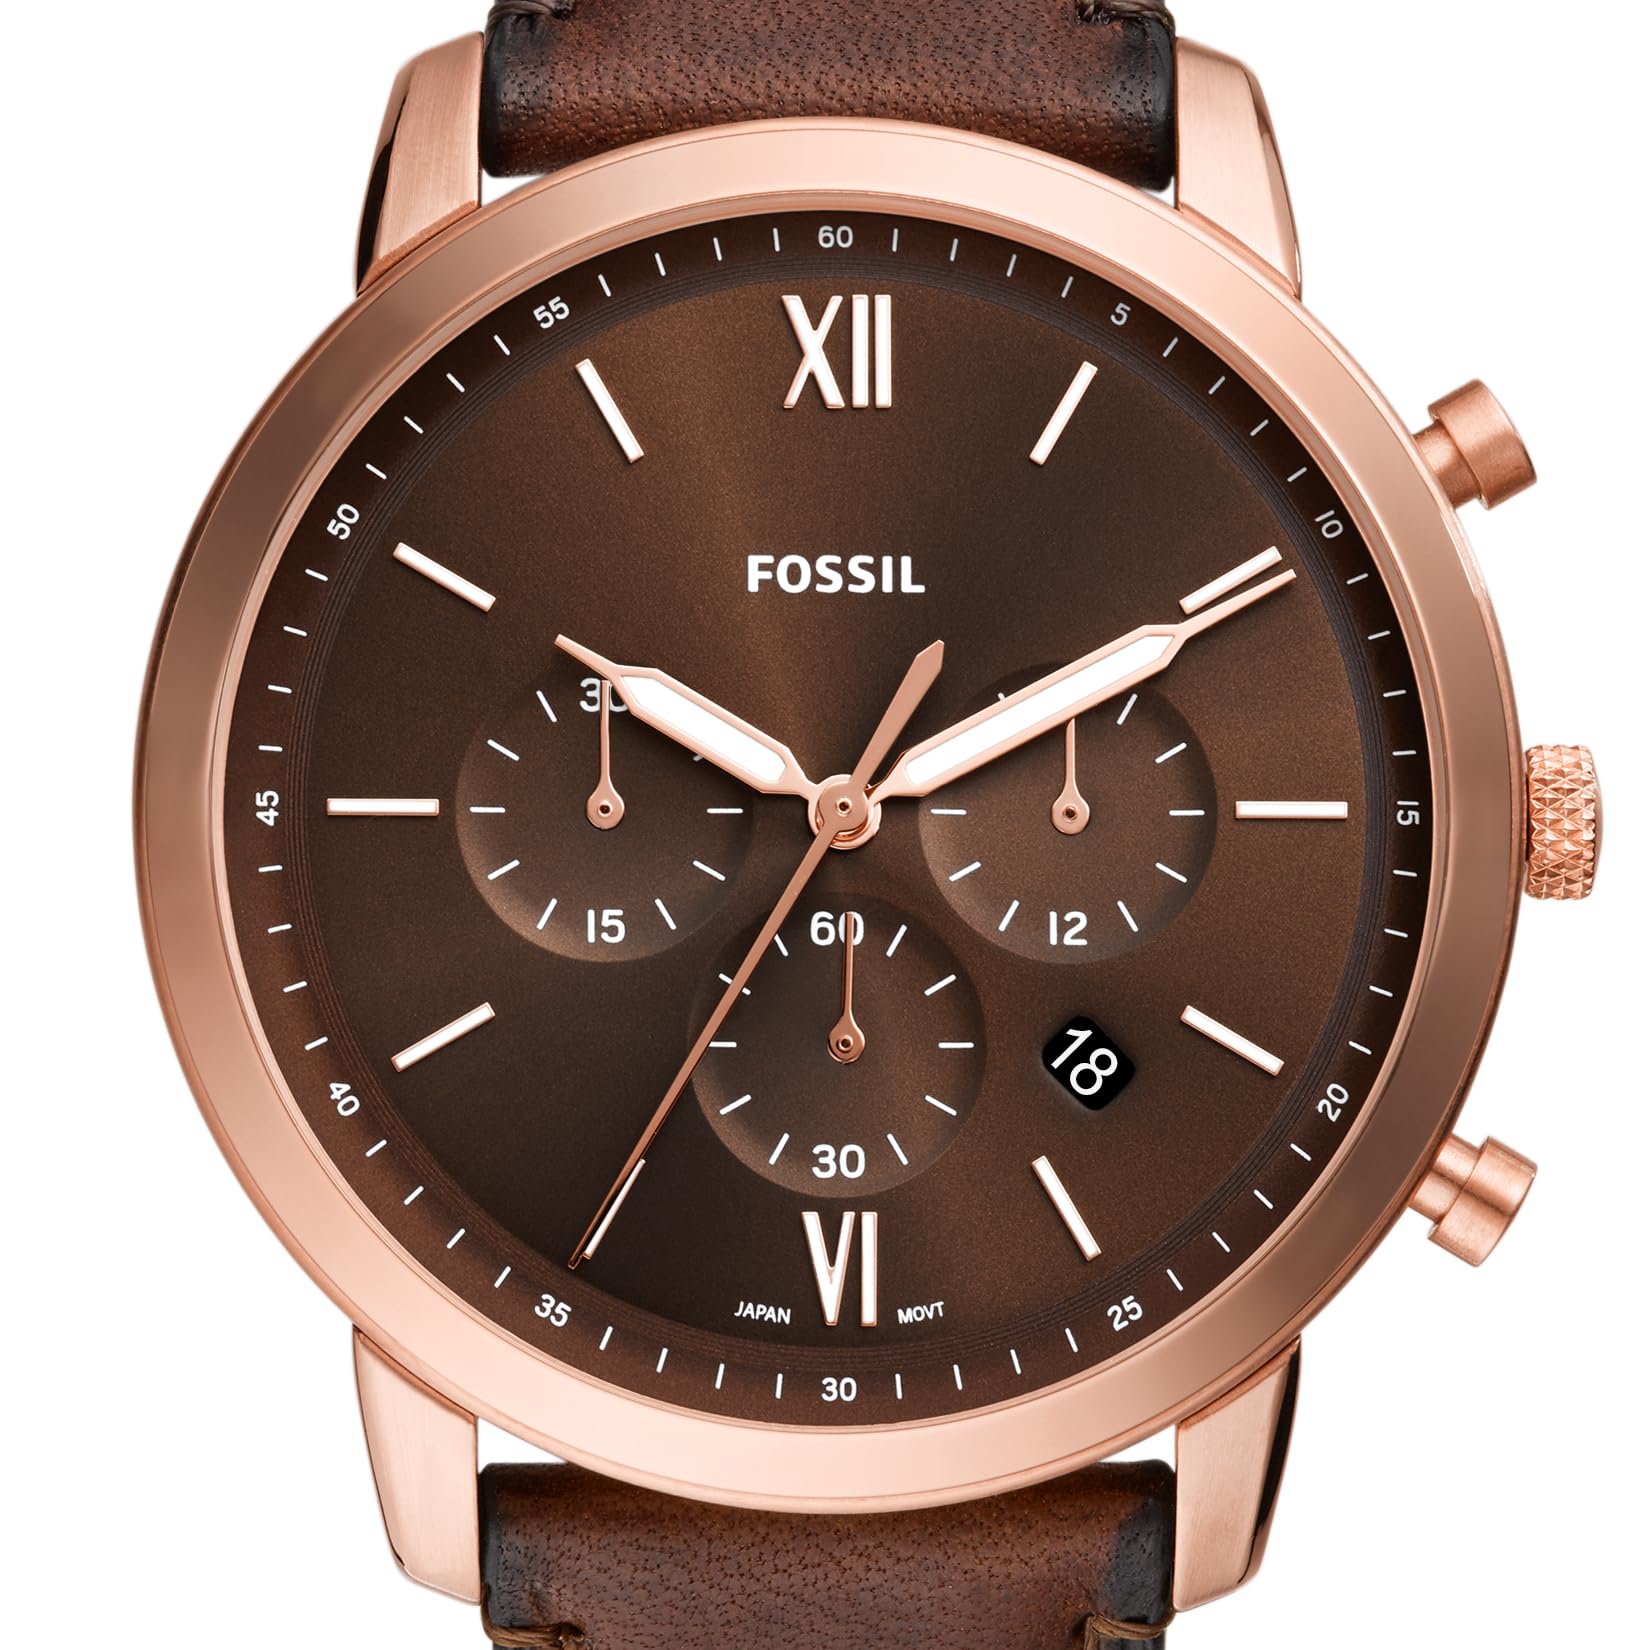 Fossil Men's Neutra Quartz Stainless Steel Chronograph Watch, Color: Rose Gold/Chocolate (Model: FS6026)